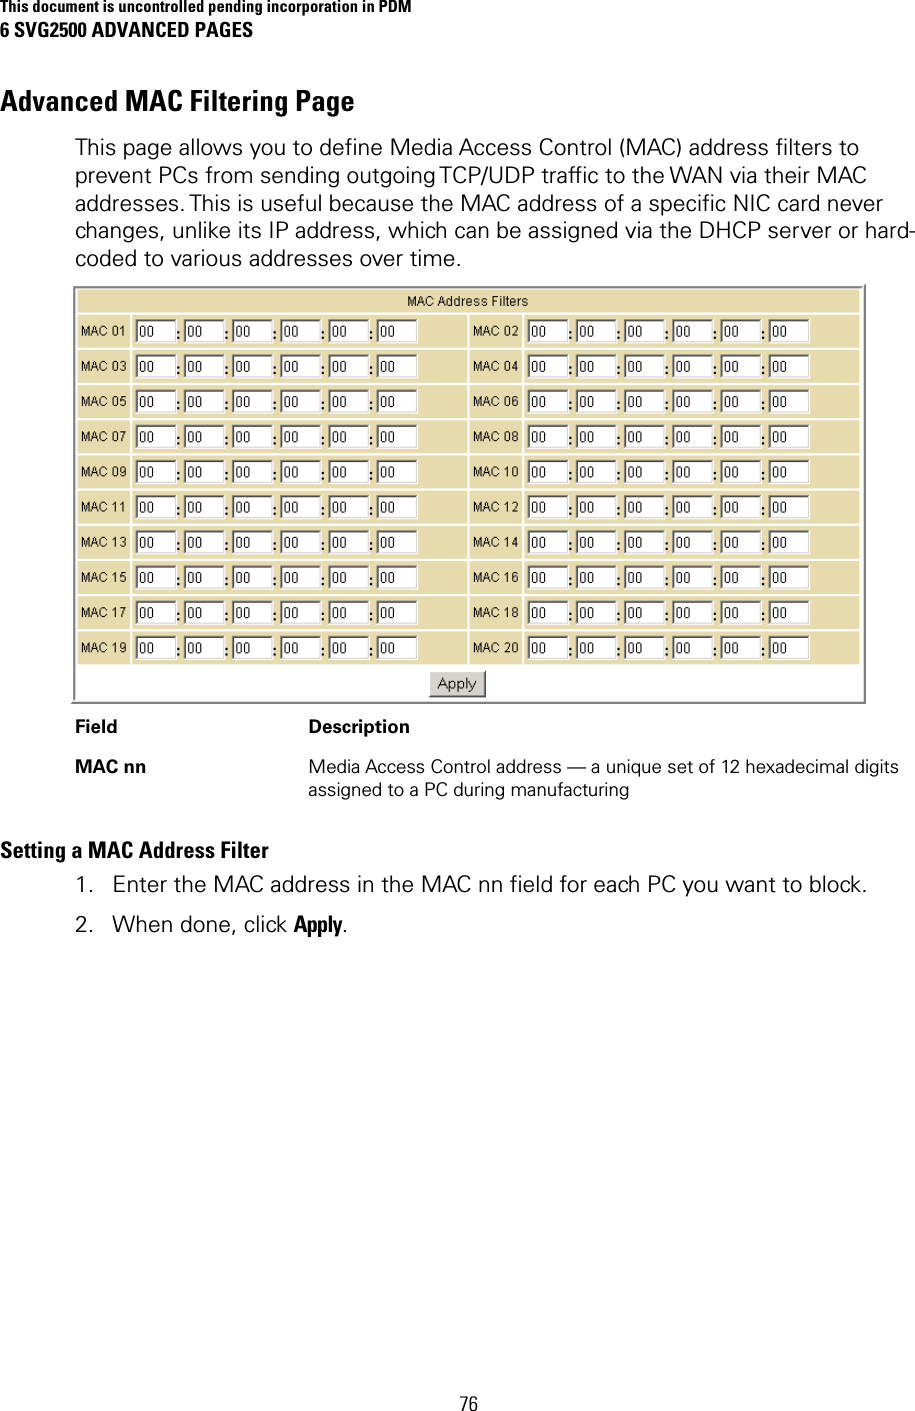 This document is uncontrolled pending incorporation in PDM 6 SVG2500 ADVANCED PAGES 76 Advanced MAC Filtering Page This page allows you to define Media Access Control (MAC) address filters to prevent PCs from sending outgoing TCP/UDP traffic to the WAN via their MAC addresses. This is useful because the MAC address of a specific NIC card never changes, unlike its IP address, which can be assigned via the DHCP server or hard-coded to various addresses over time.  Field Description MAC nn  Media Access Control address — a unique set of 12 hexadecimal digits assigned to a PC during manufacturing Setting a MAC Address Filter 1. Enter the MAC address in the MAC nn field for each PC you want to block. 2. When done, click Apply. 